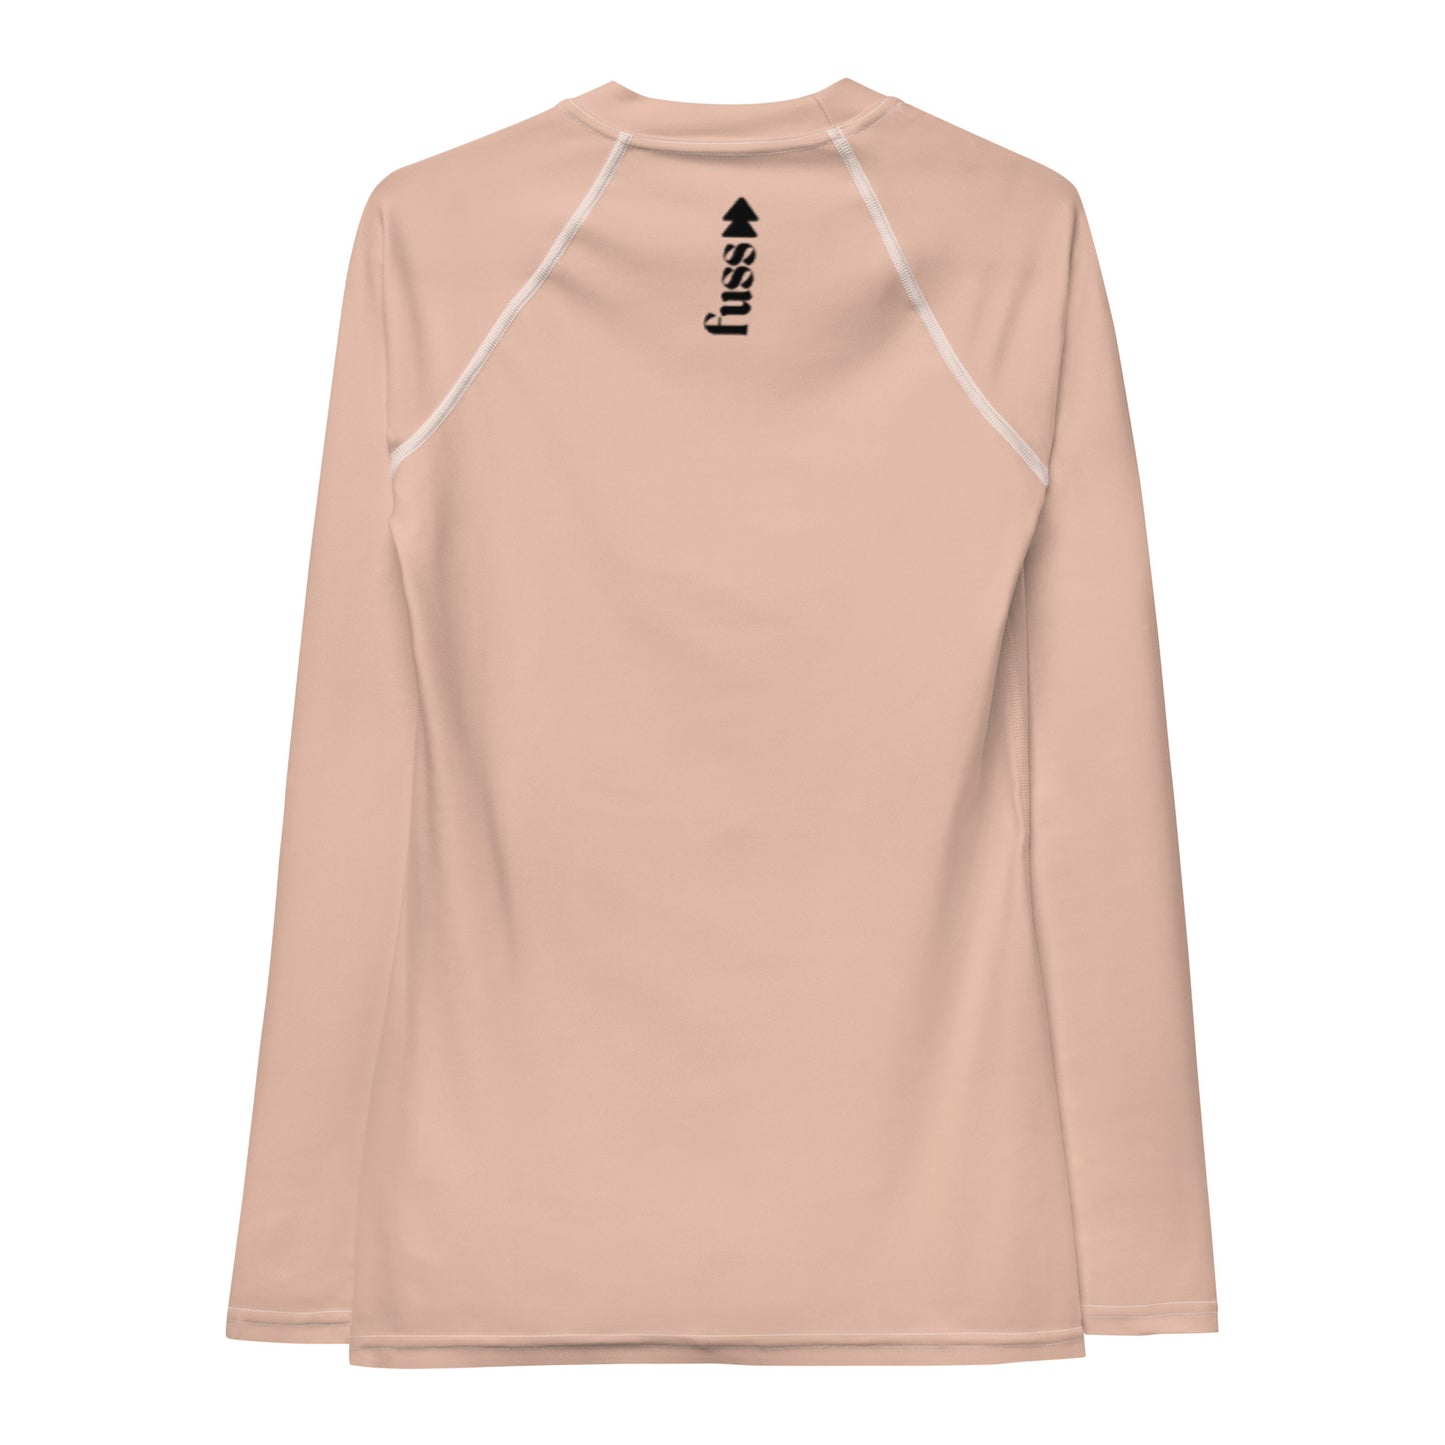 Women's Long Sleeve Top In Perfect Neutral